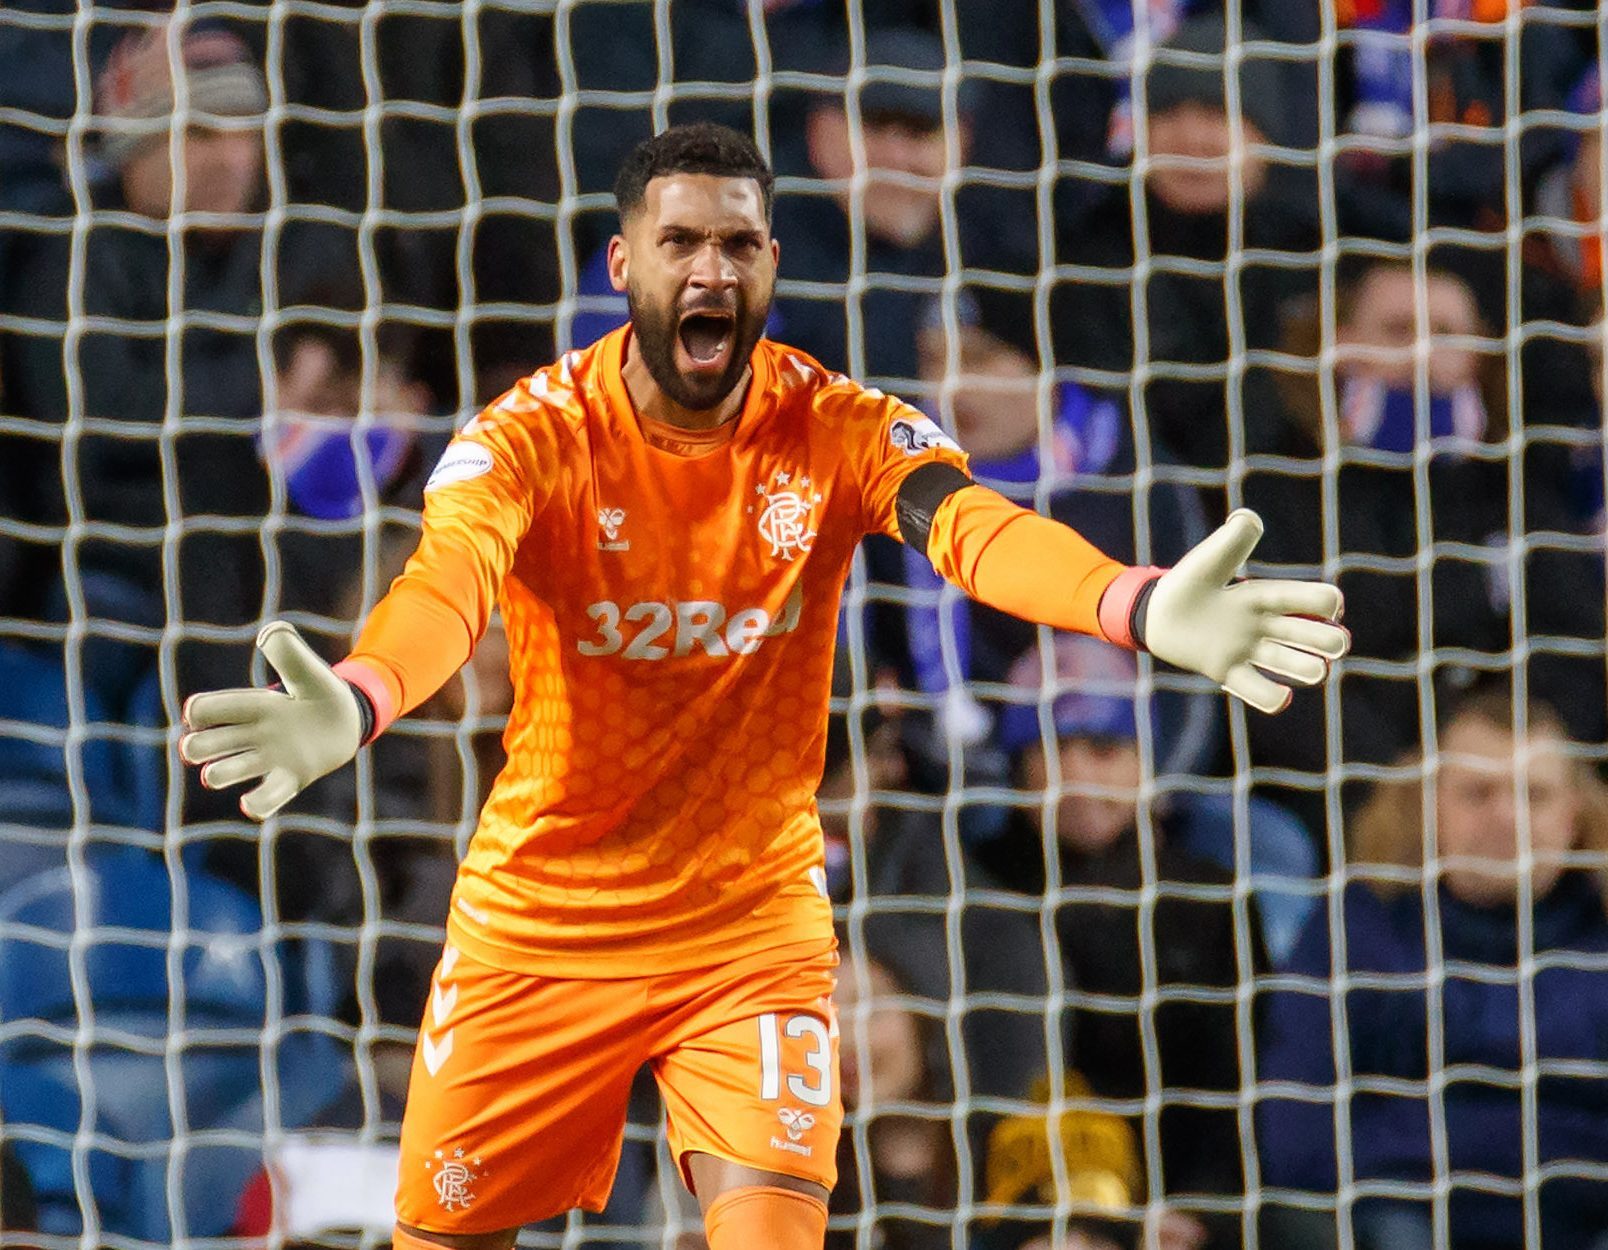 Wes Foderingham, who spent five years at Rangers, has joined Sheffield United